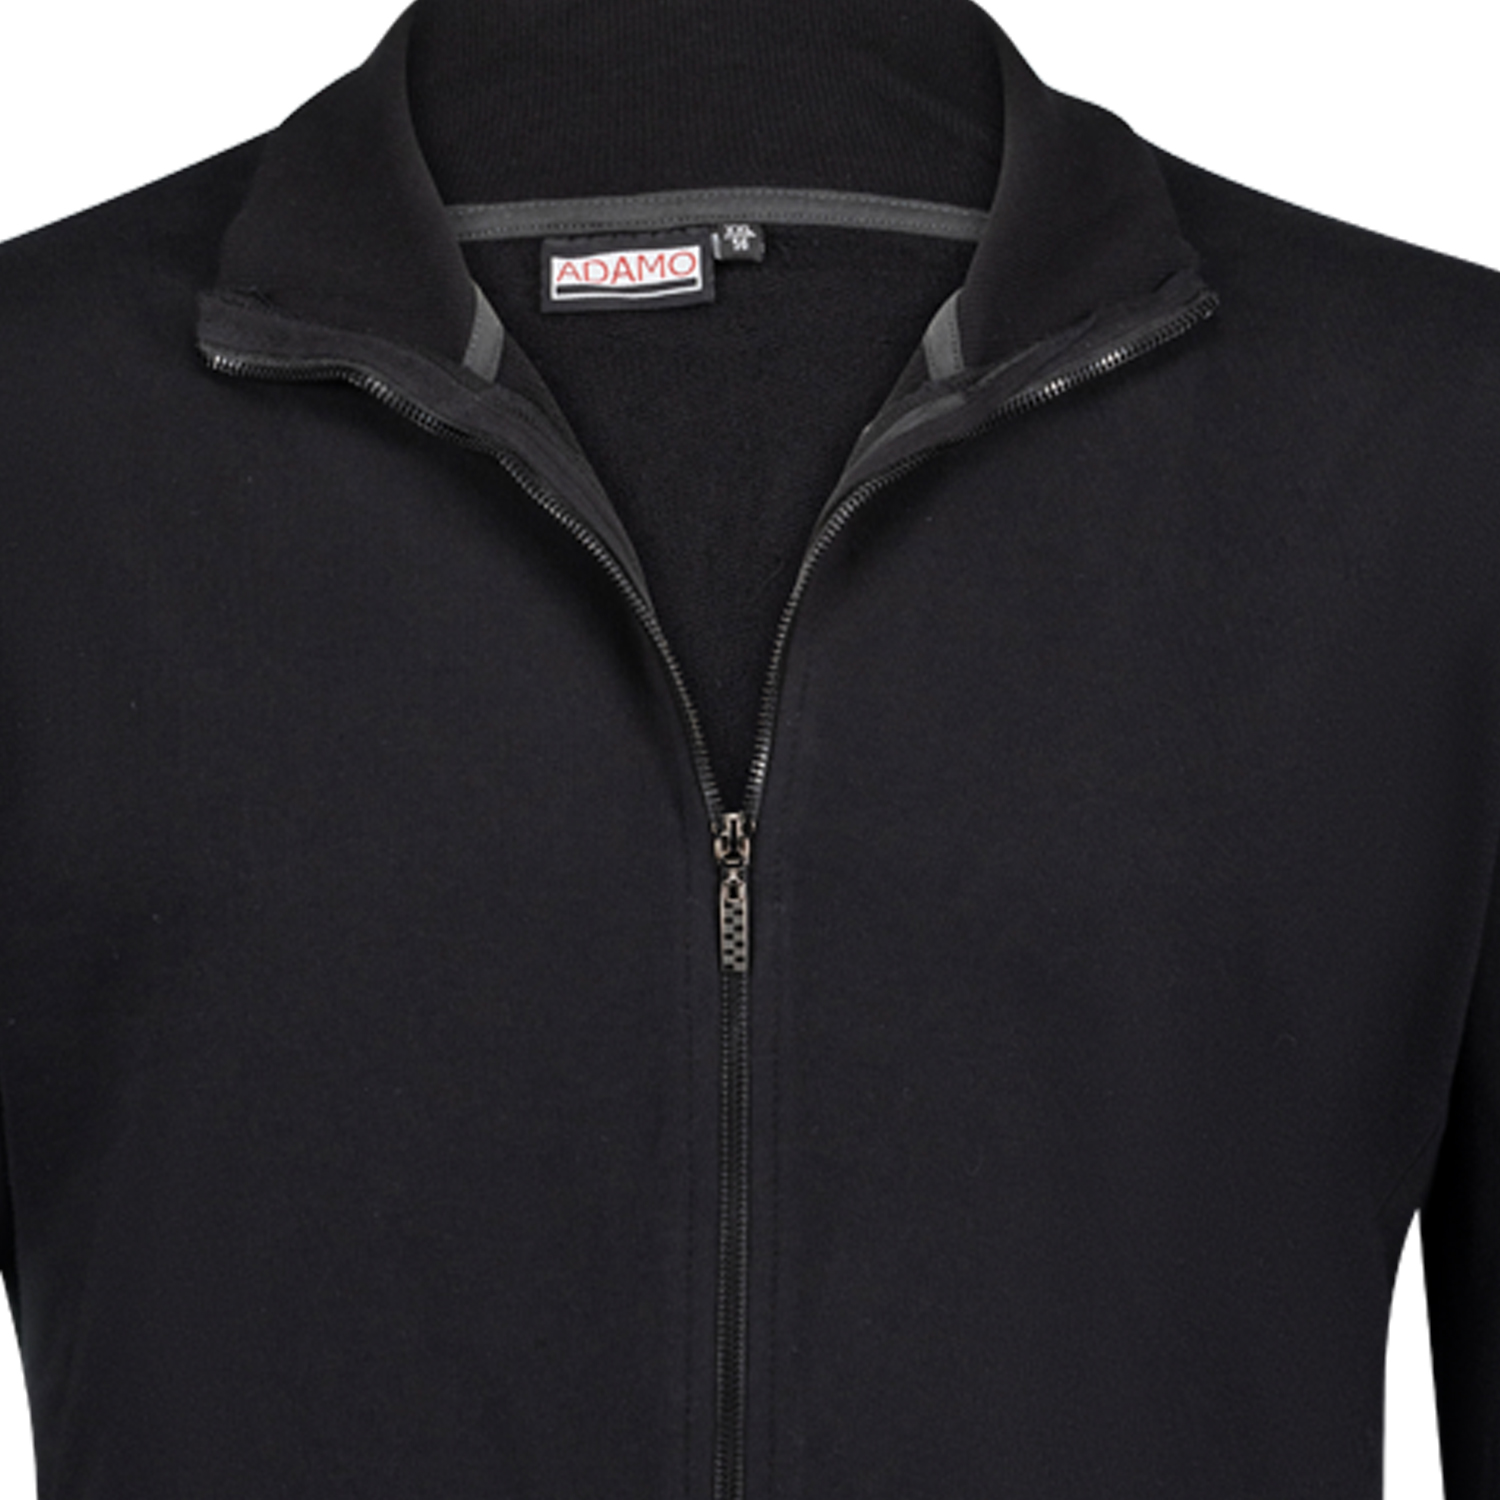 Sweatjacket ATHEN from Adamo in black in oversizes up to 14XL